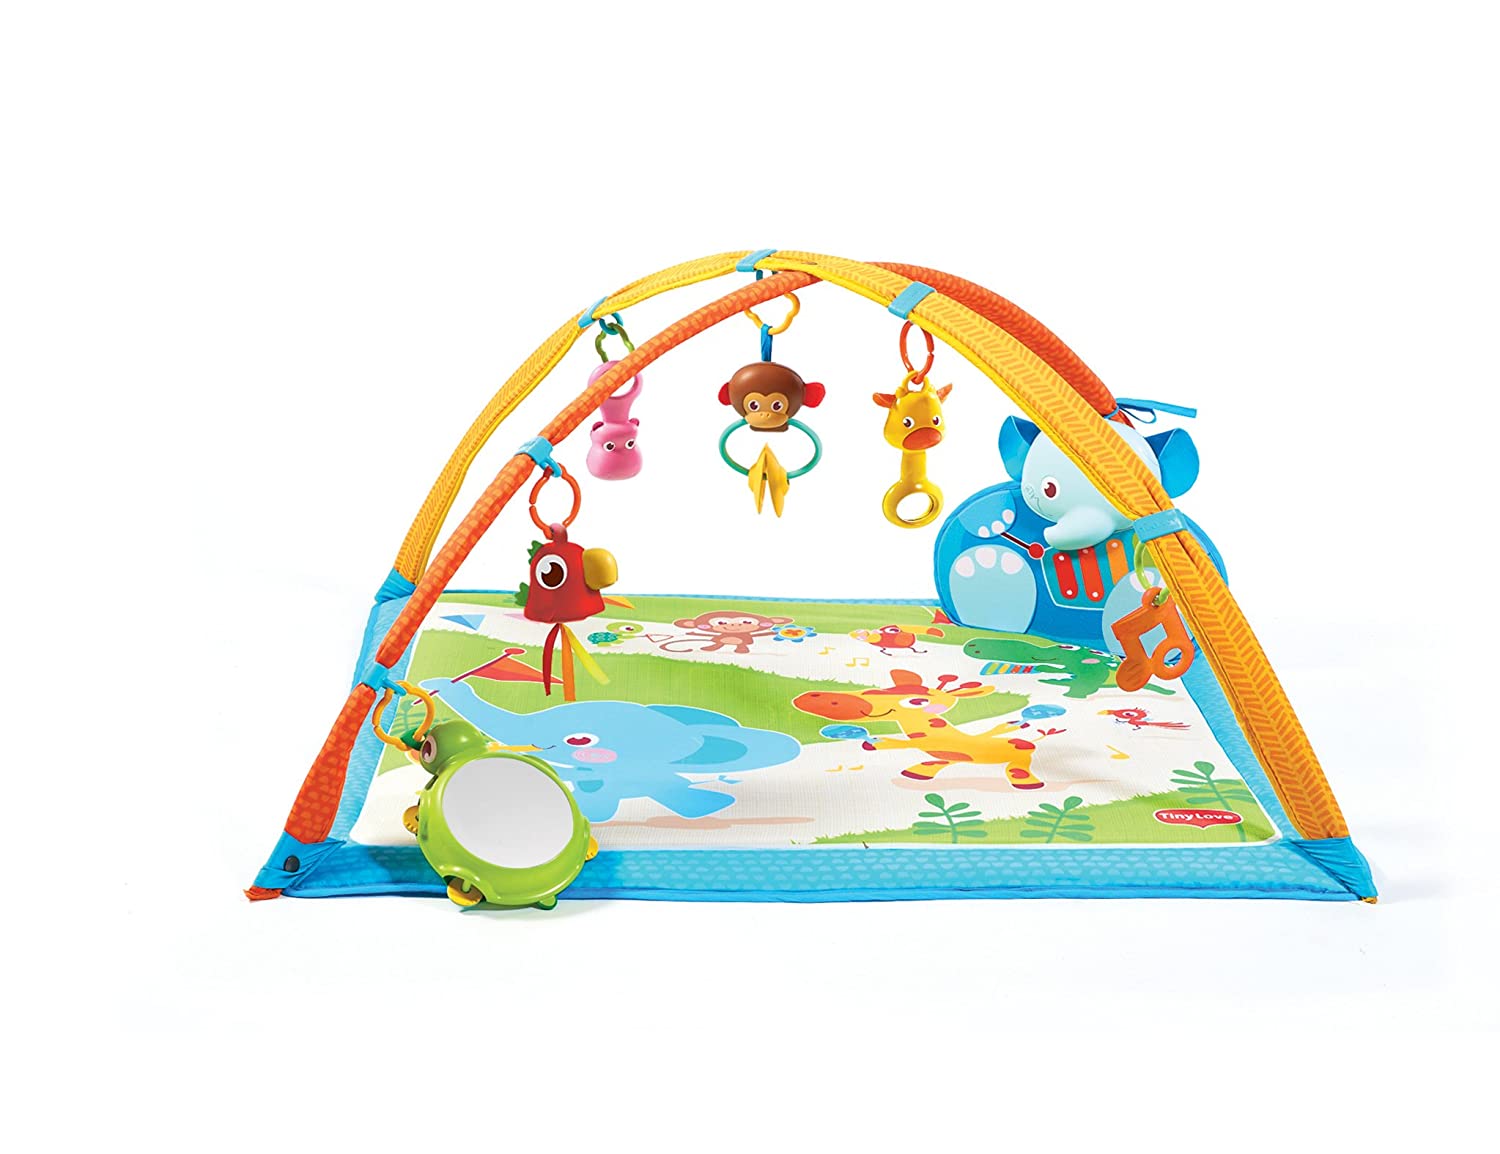 Tiny Love Gymini My Musical Friends (Interactive Play Mat with Music and Many Playing Possibilities, Play Mat, Activity Blanket, Baby Blanket) Multi-Coloured